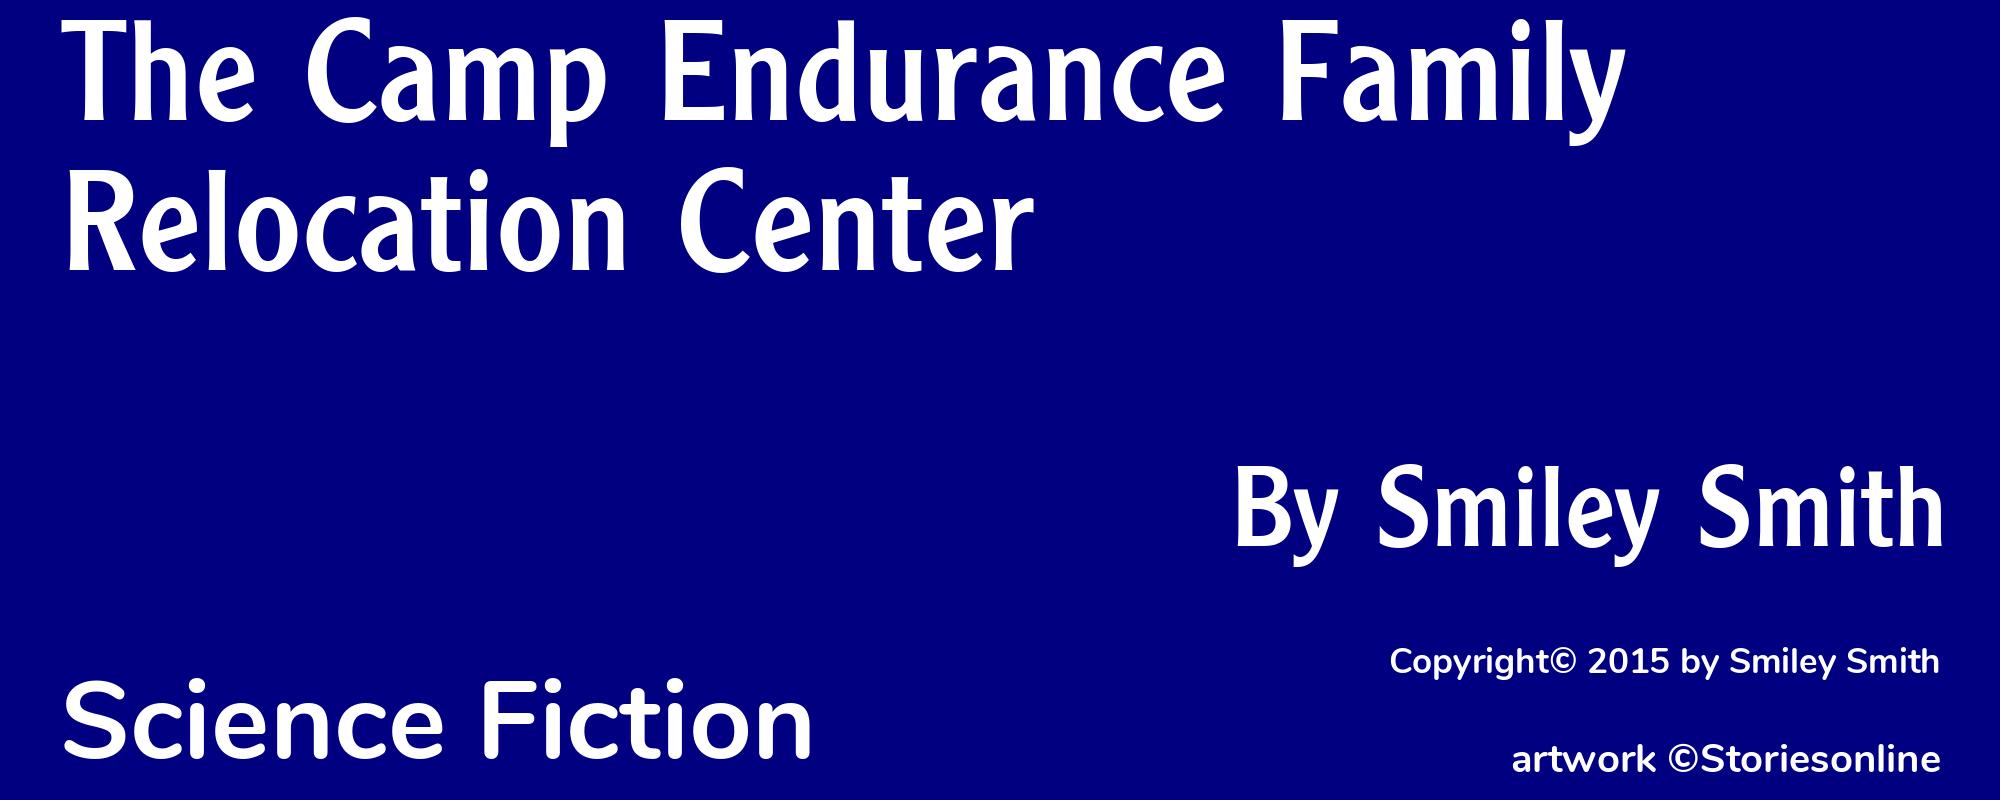 The Camp Endurance Family Relocation Center - Cover